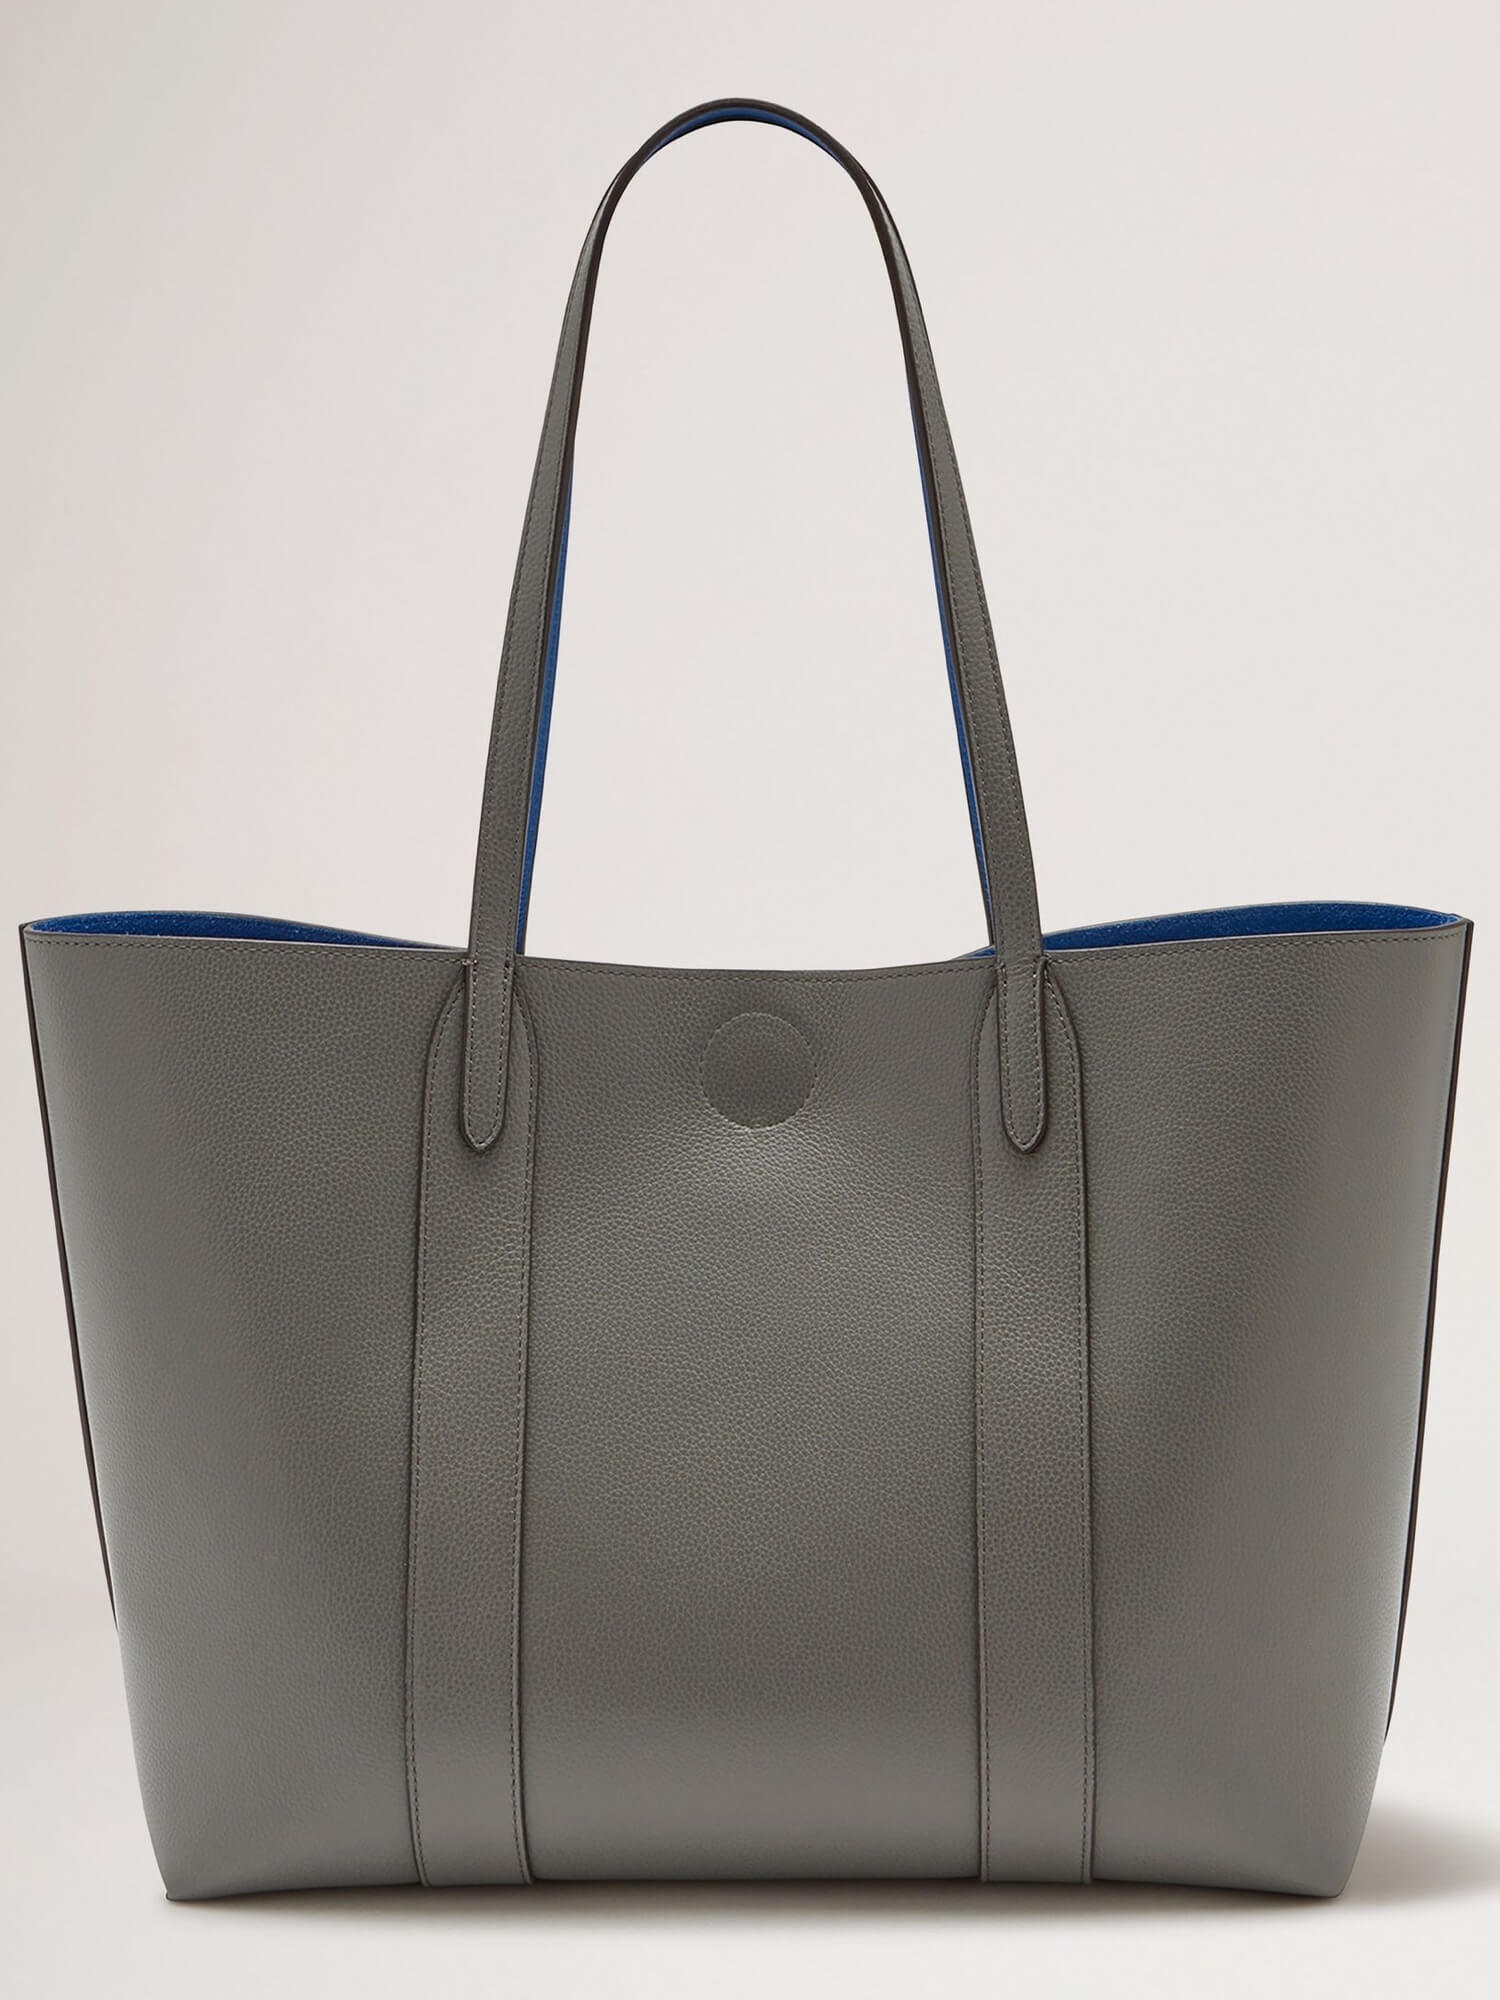 Mulberry Tote Charcoal Small Classic Grain